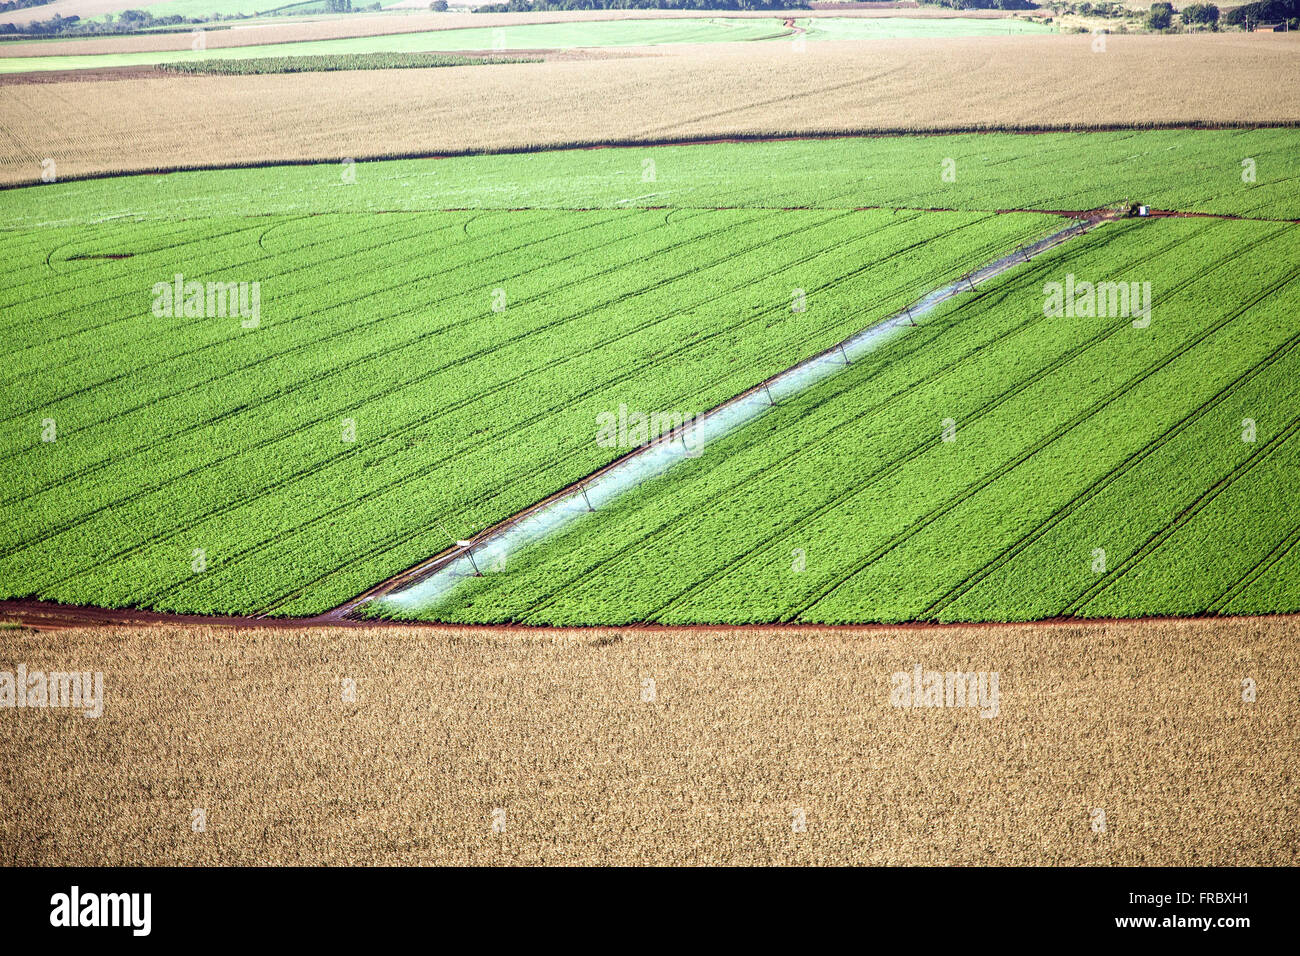 Aerial view of irrigated soybean planting in the countryside Stock Photo